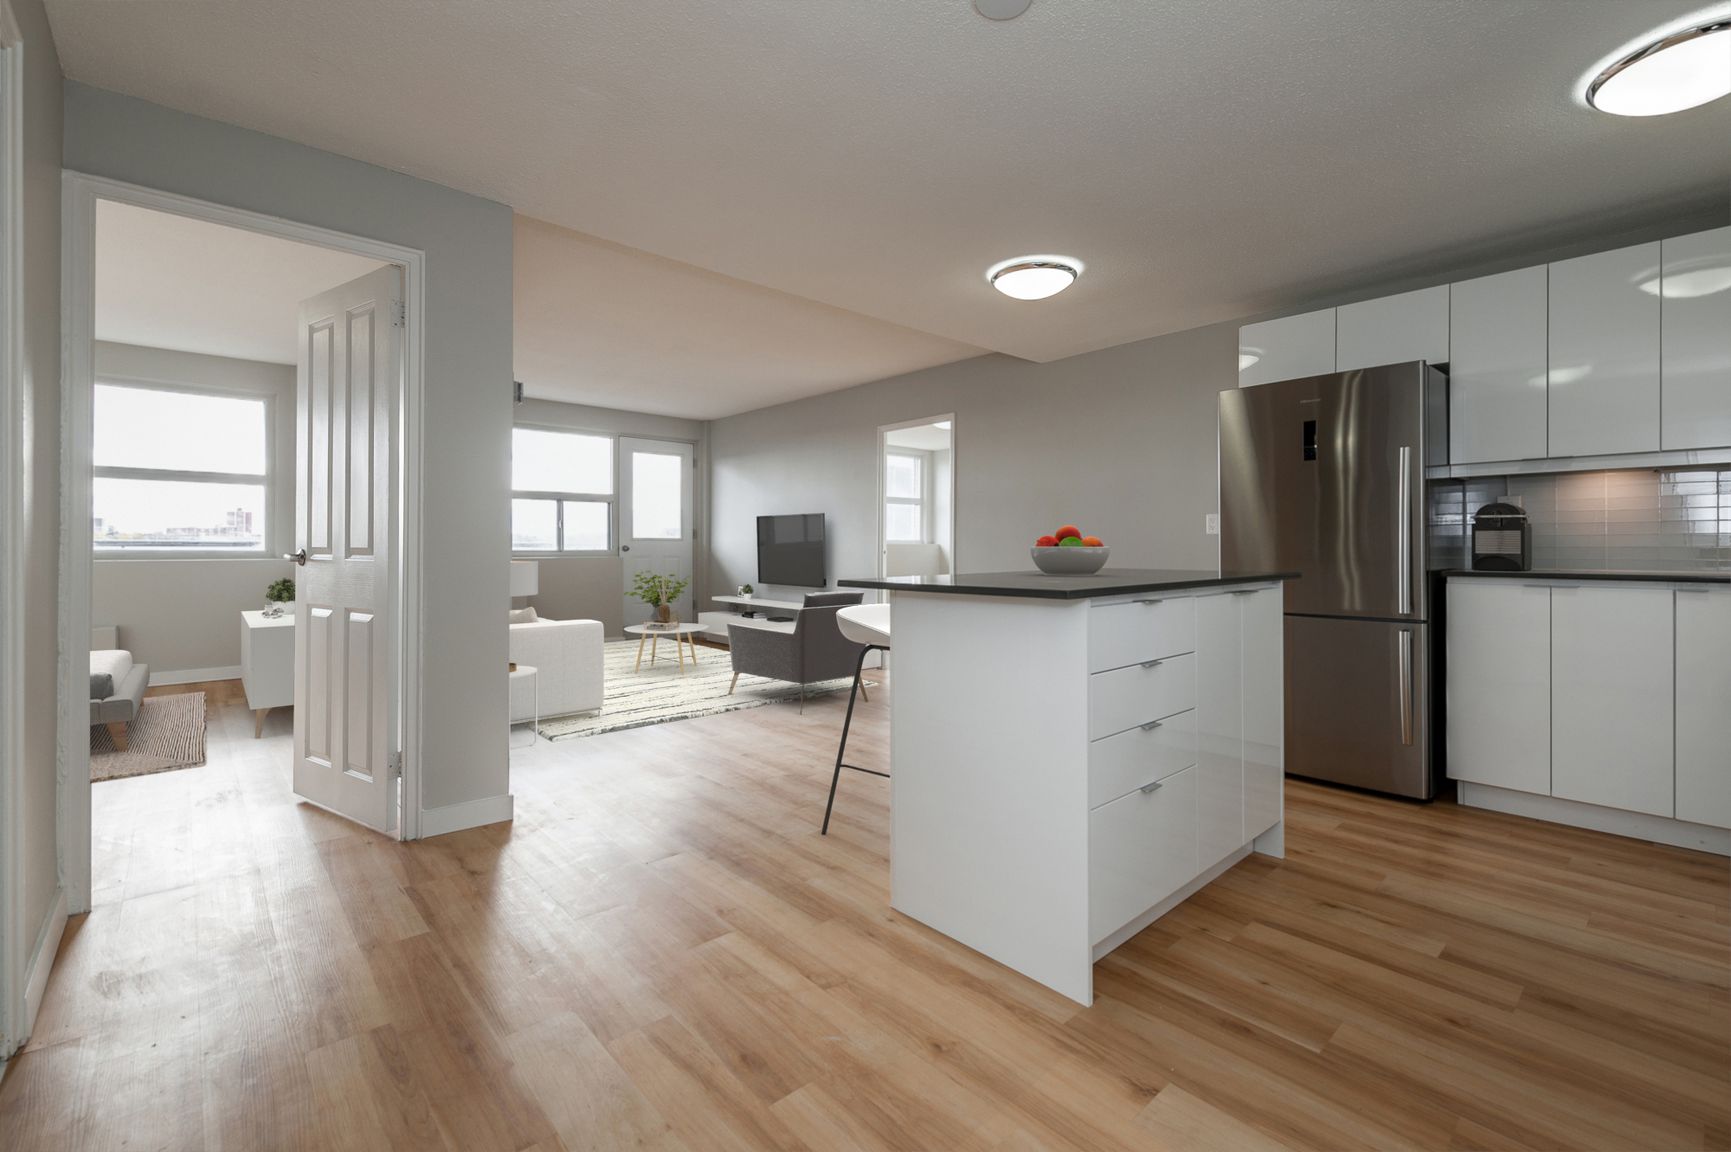 2 bedroom apartment of 719 sq. ft in Ottawa